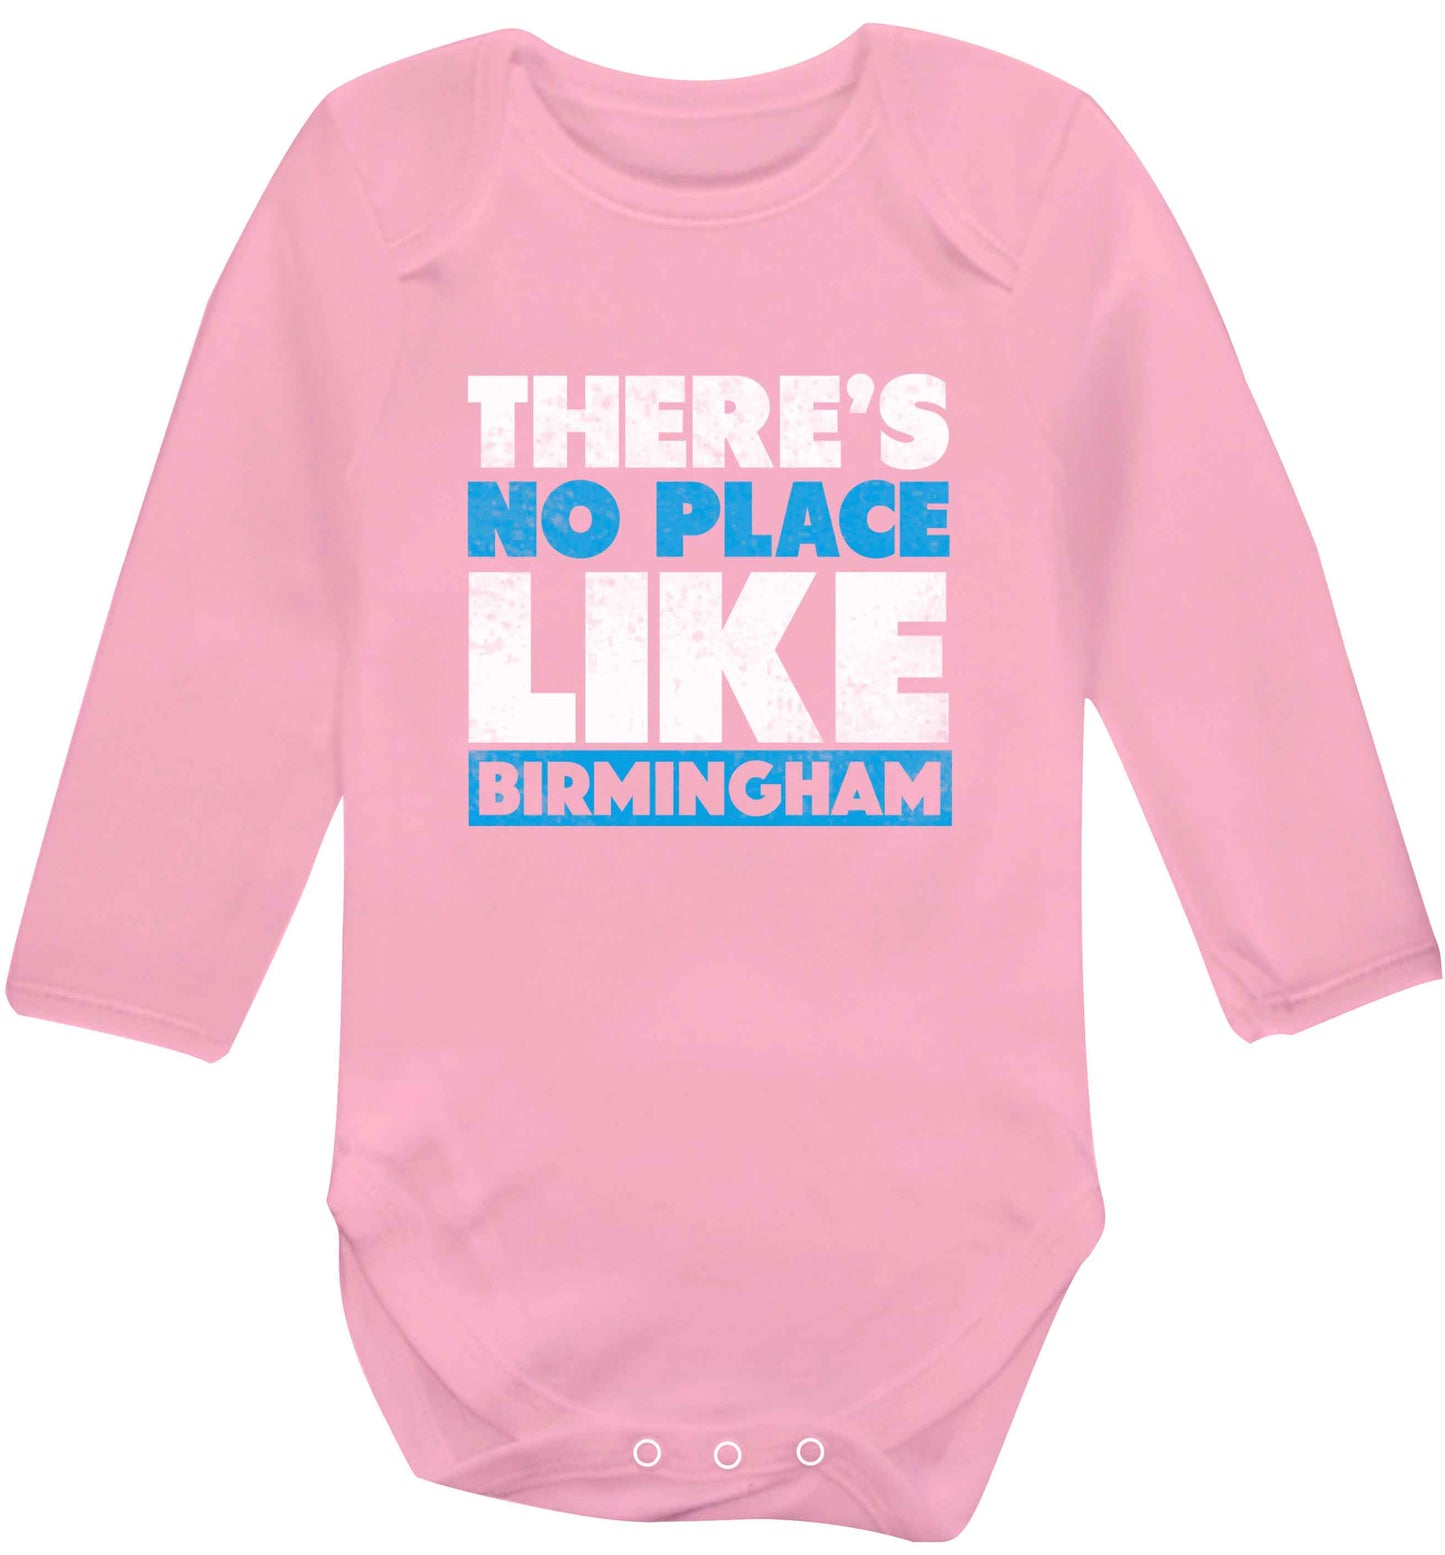 There's no place like Birmingham baby vest long sleeved pale pink 6-12 months